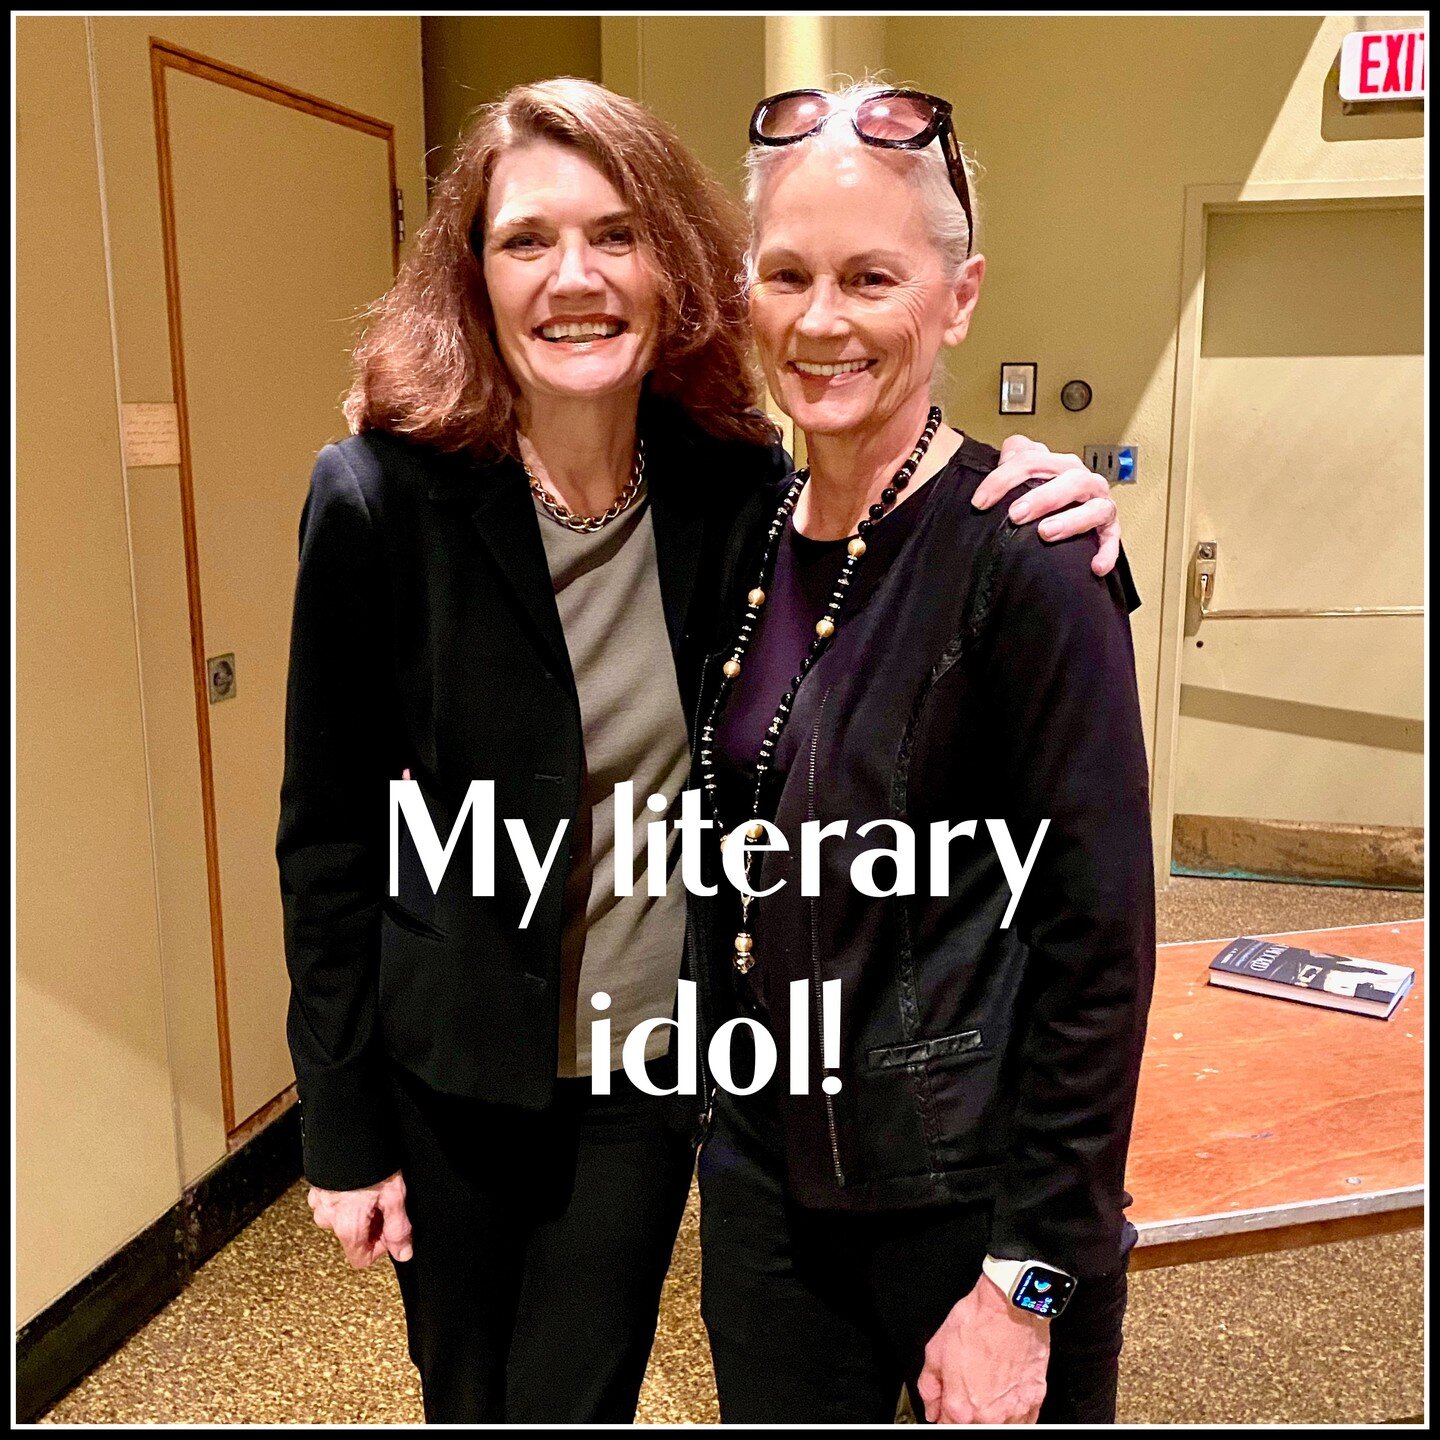 Thrilled to hear Jeannette Walls talk about her latest historical fiction book, Hang the Moon, at the Pittsburgh Theological Seminary on Saturday. She has been my idol since reading her 2005 memoir, The Glass Castle. Her beautiful prose affected me i